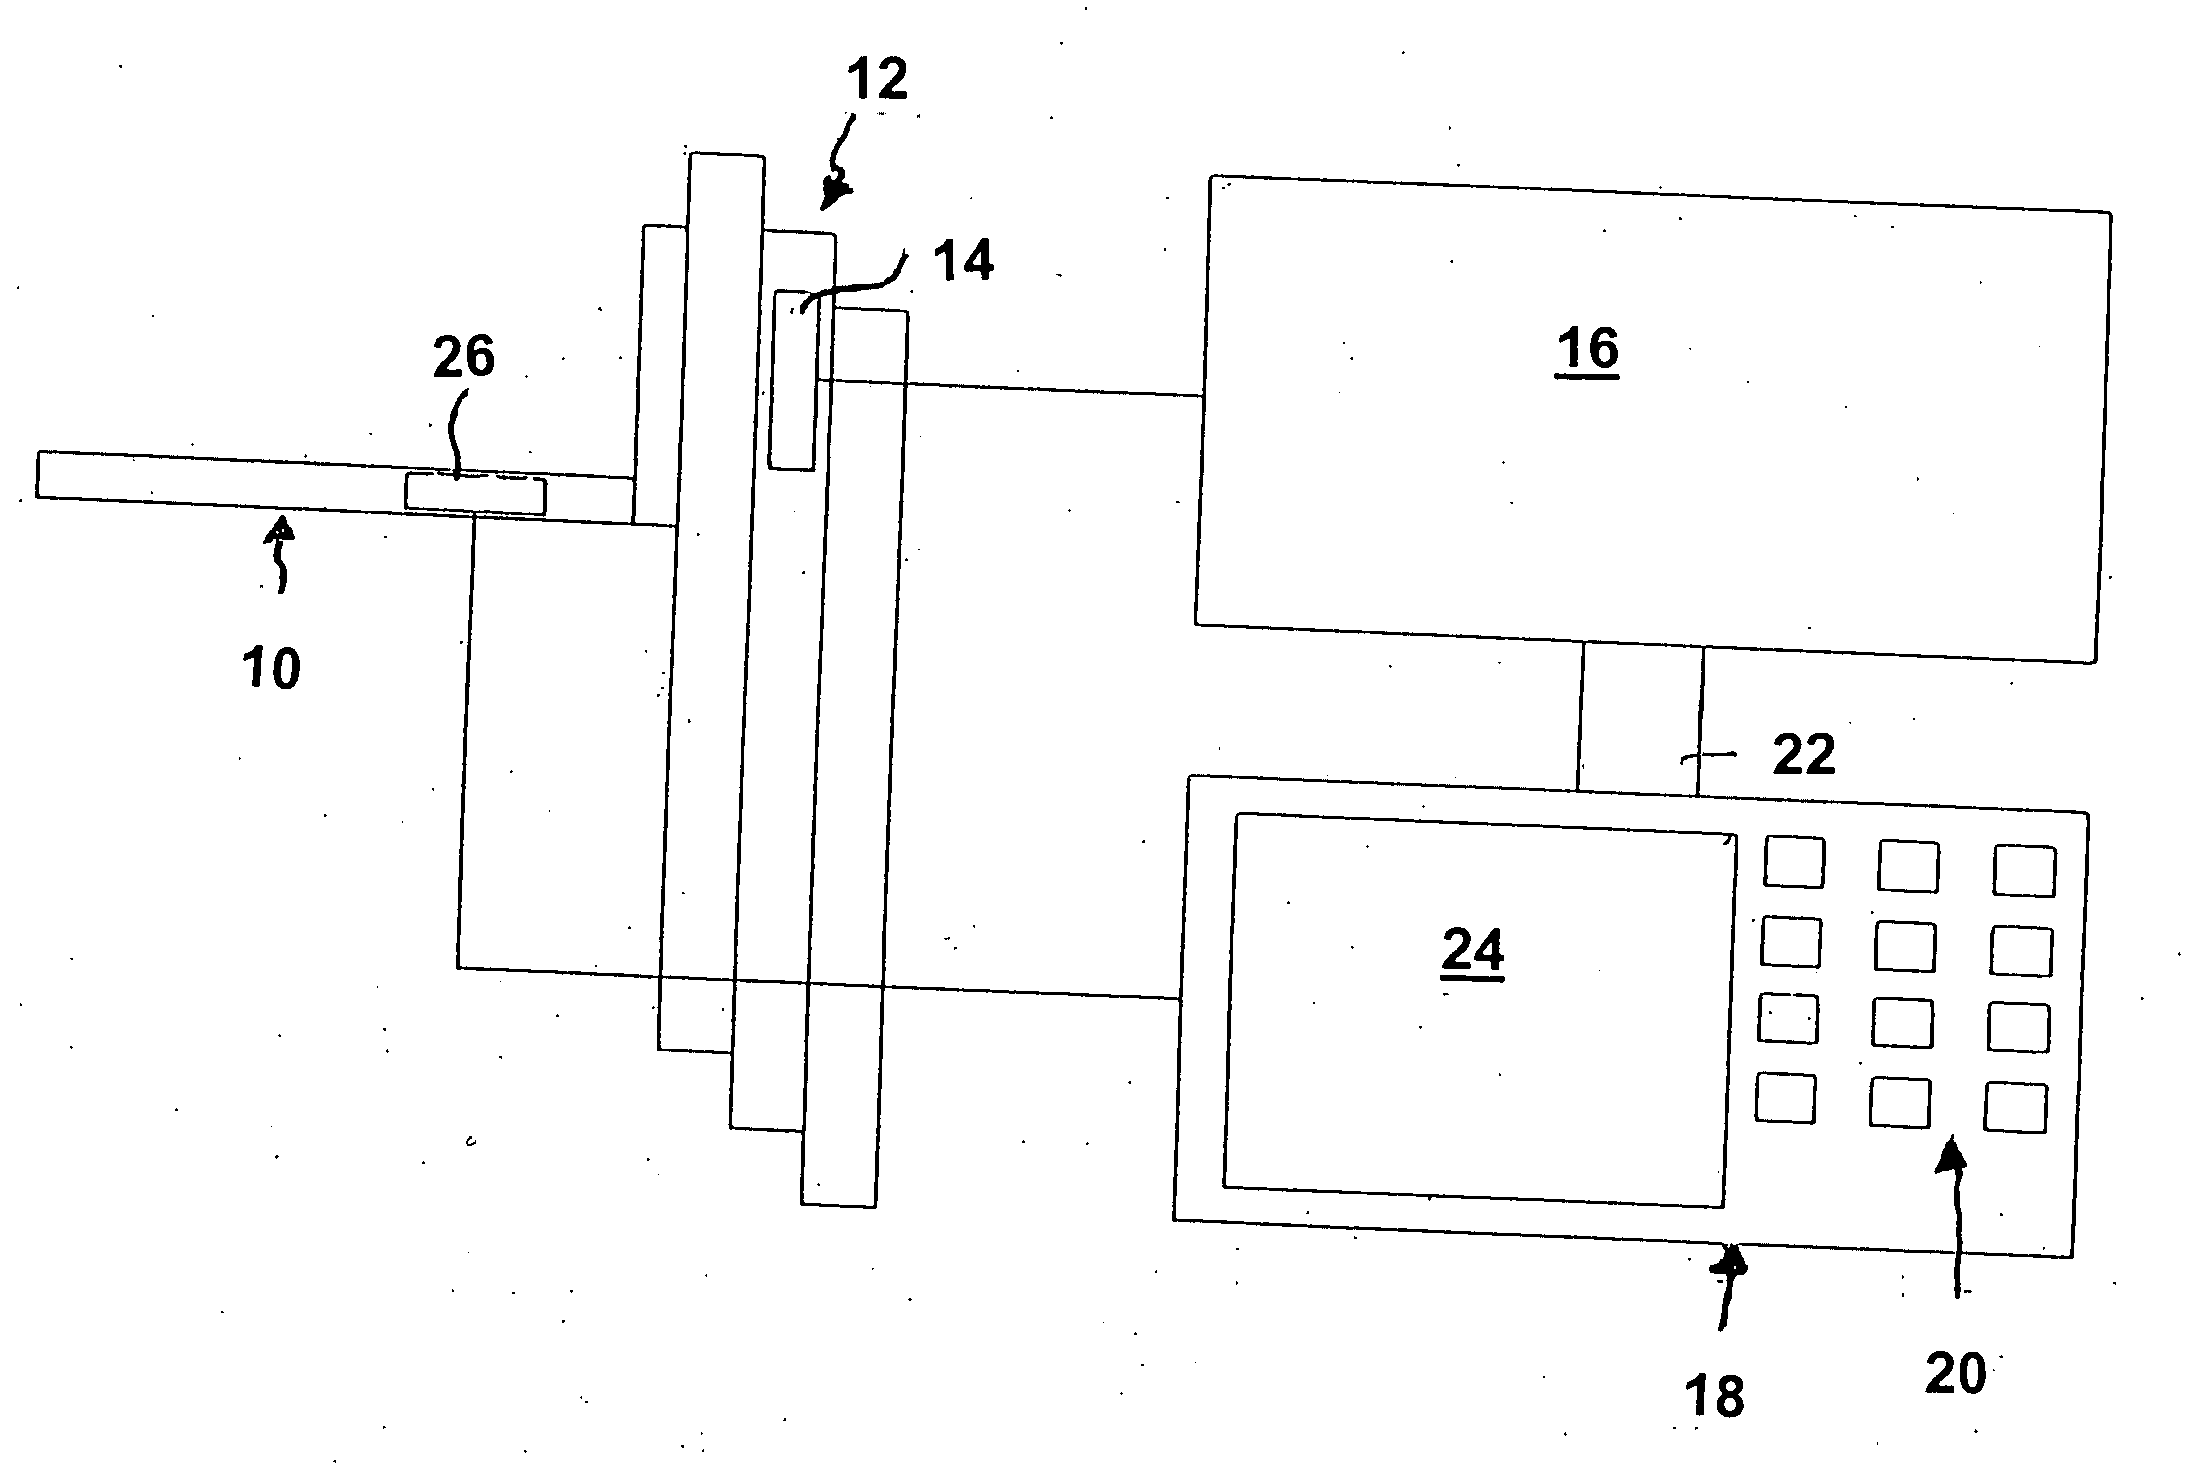 Device for aiding stacking and unstacking for a stacker truck